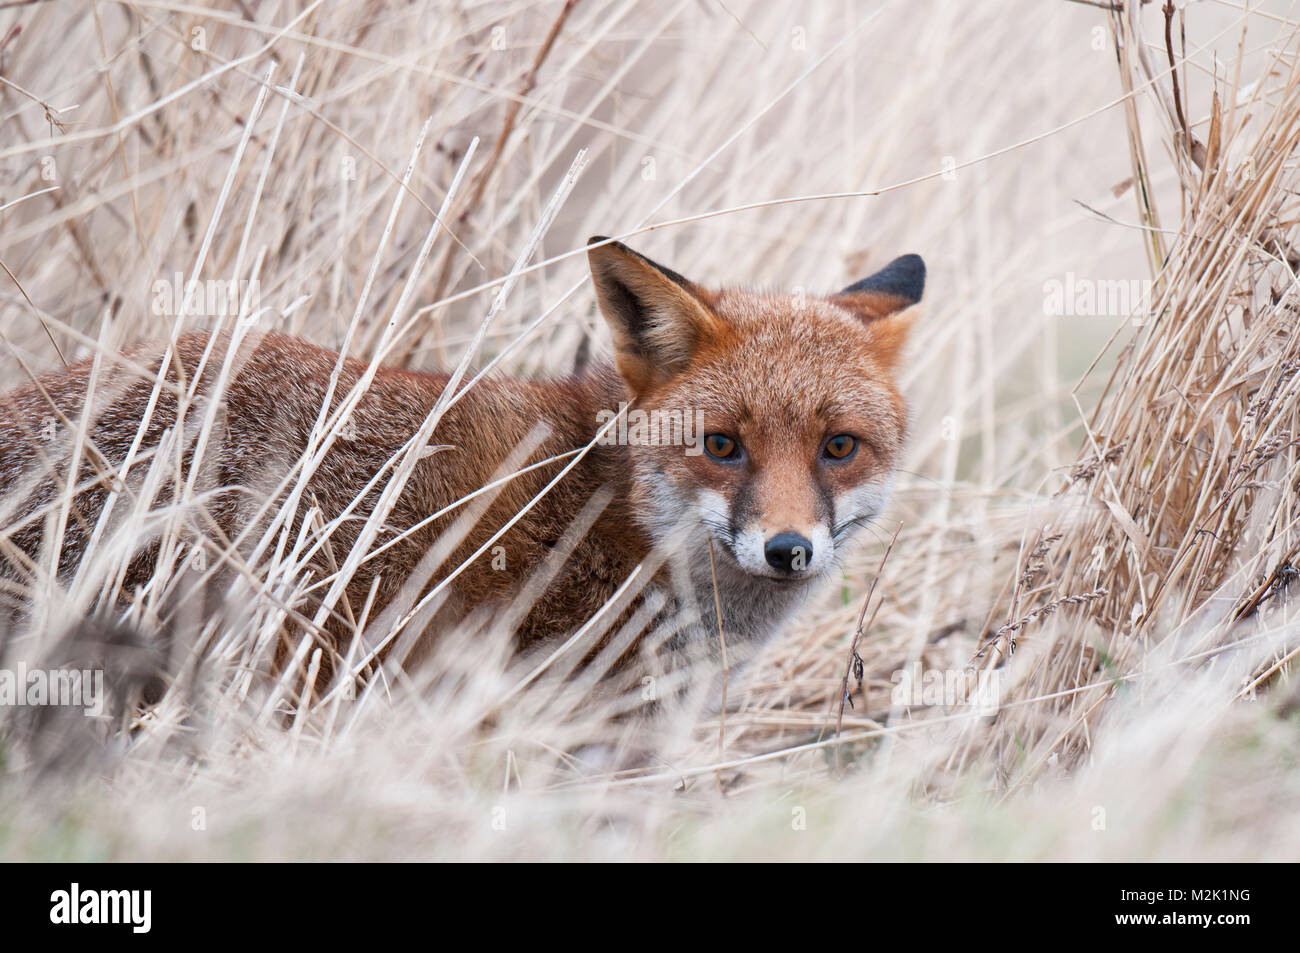 Volpe (Vulpes vulpes), adulto, in agguato in erba lunga, a RSPB Saltholme, Middlesbrough, Teesside. Marzo. Foto Stock